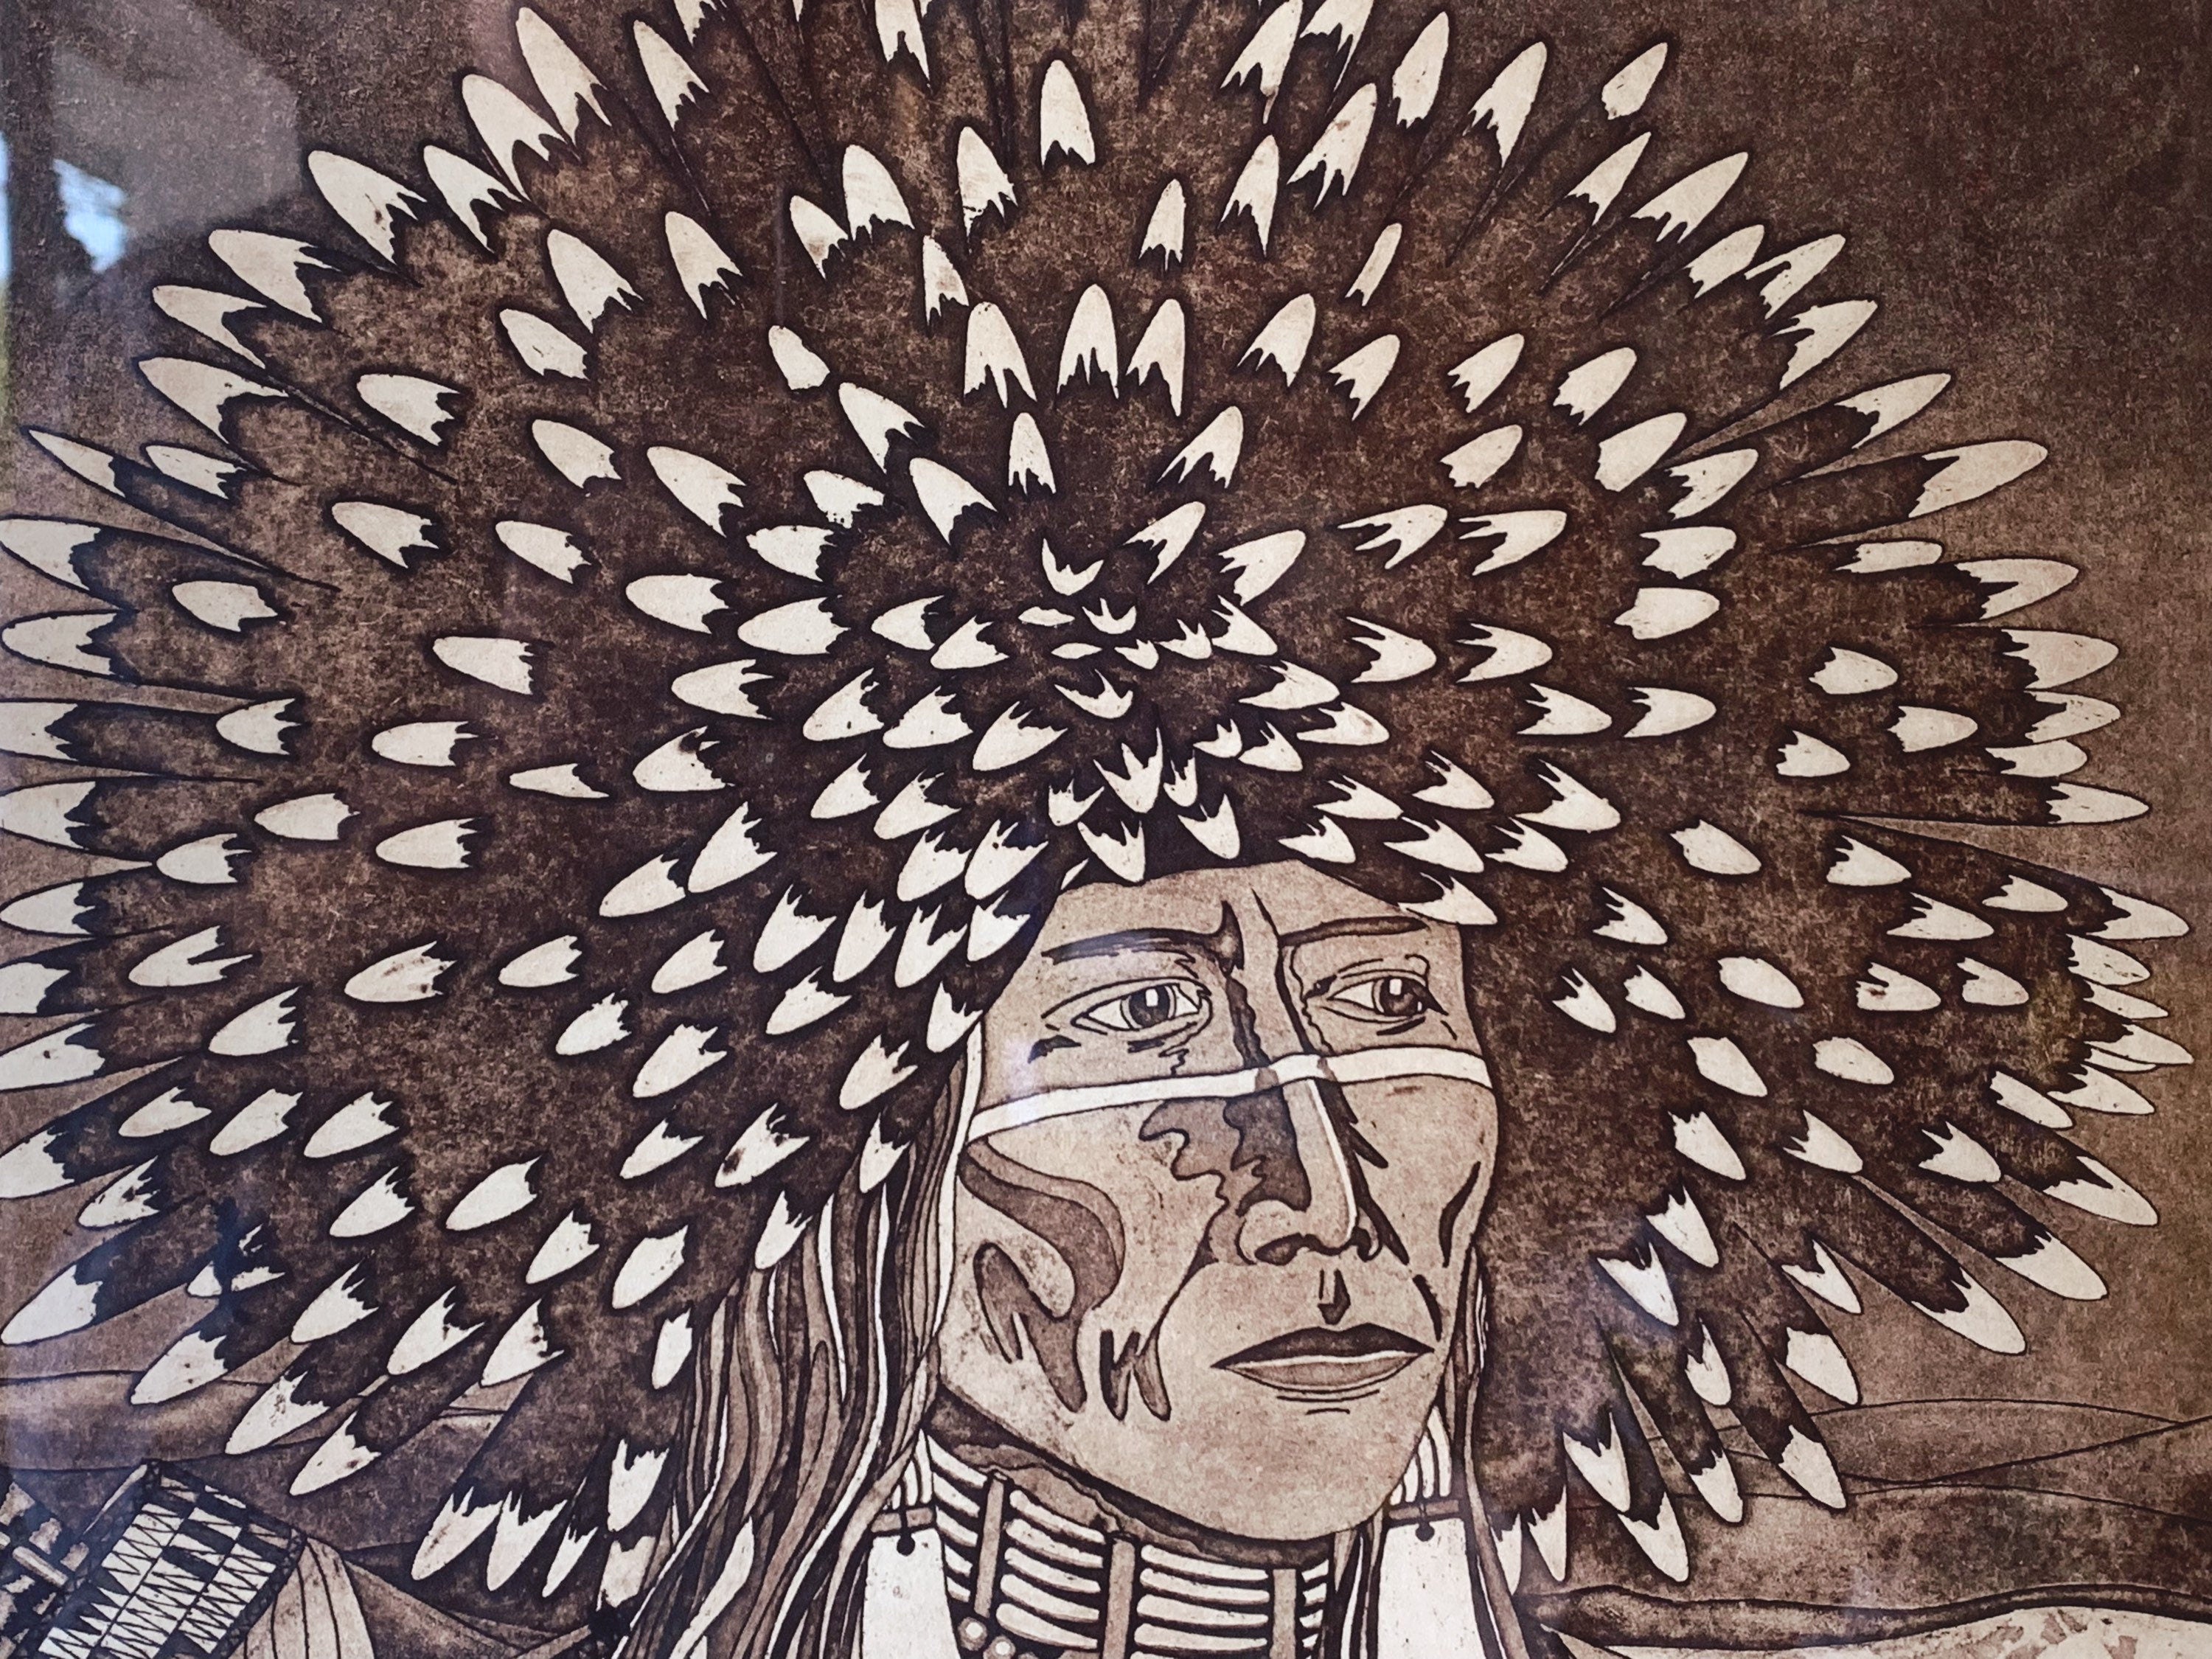 Large Vintage Southwestern Native American Print in Wooden Frame 28" X 35" Signed Murphy Broncho | Wall Art | Contemporary Decor